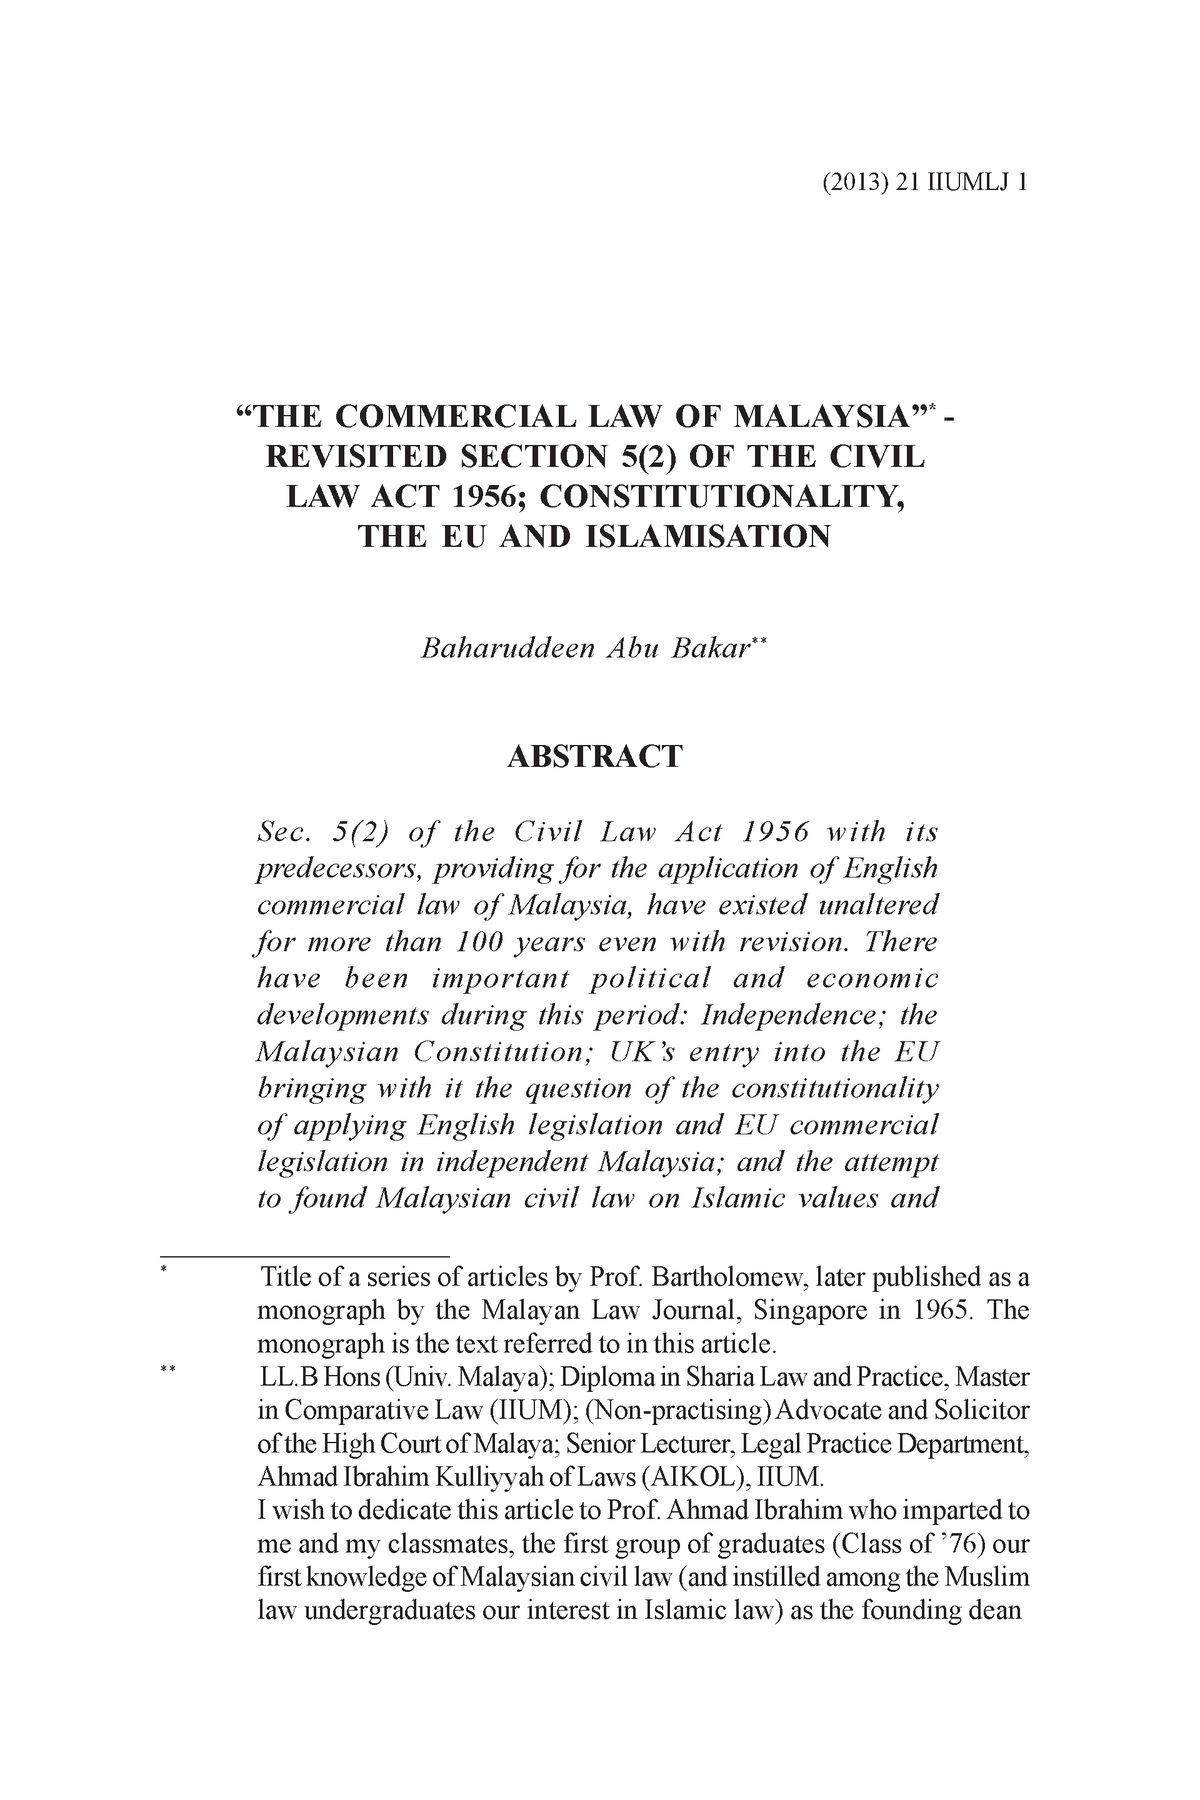 95-Article Text-327-329-10-2013 1024 - “THE COMMERCIAL LAW OF MALAYSIA ...